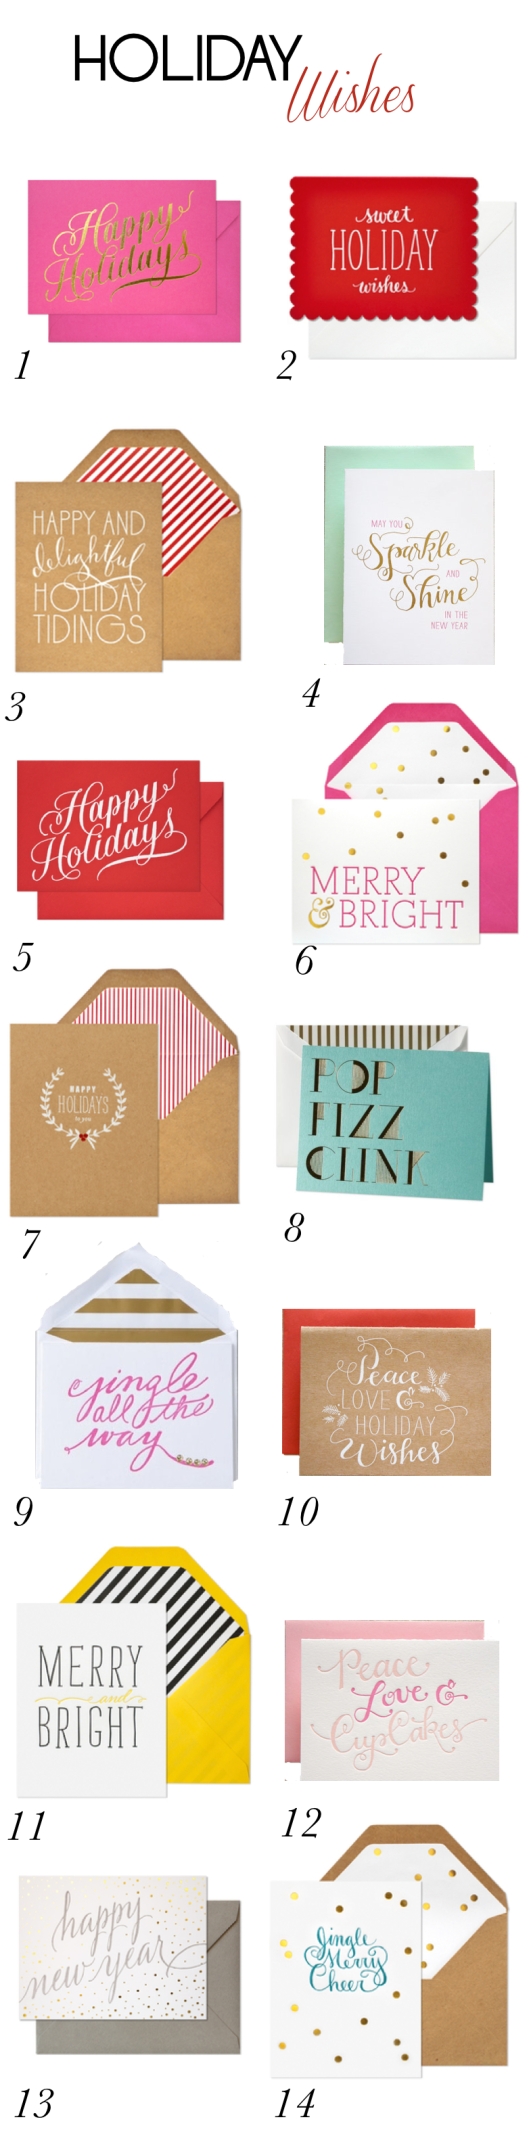 Holiday Wishes - Chic Holiday Cards